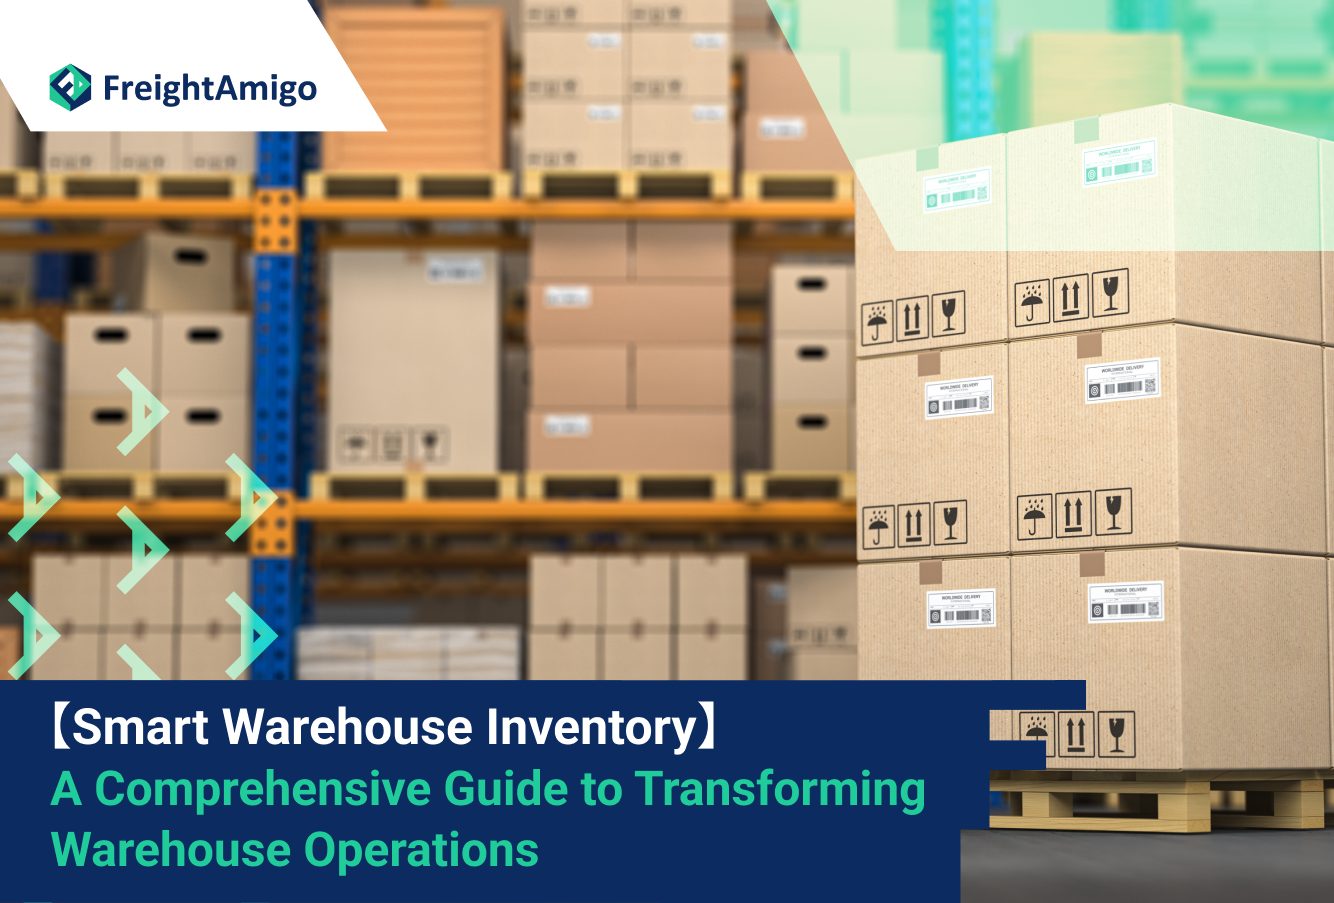 【Smart Warehouse Inventory】 A Comprehensive Guide to Transforming Warehouse Operations